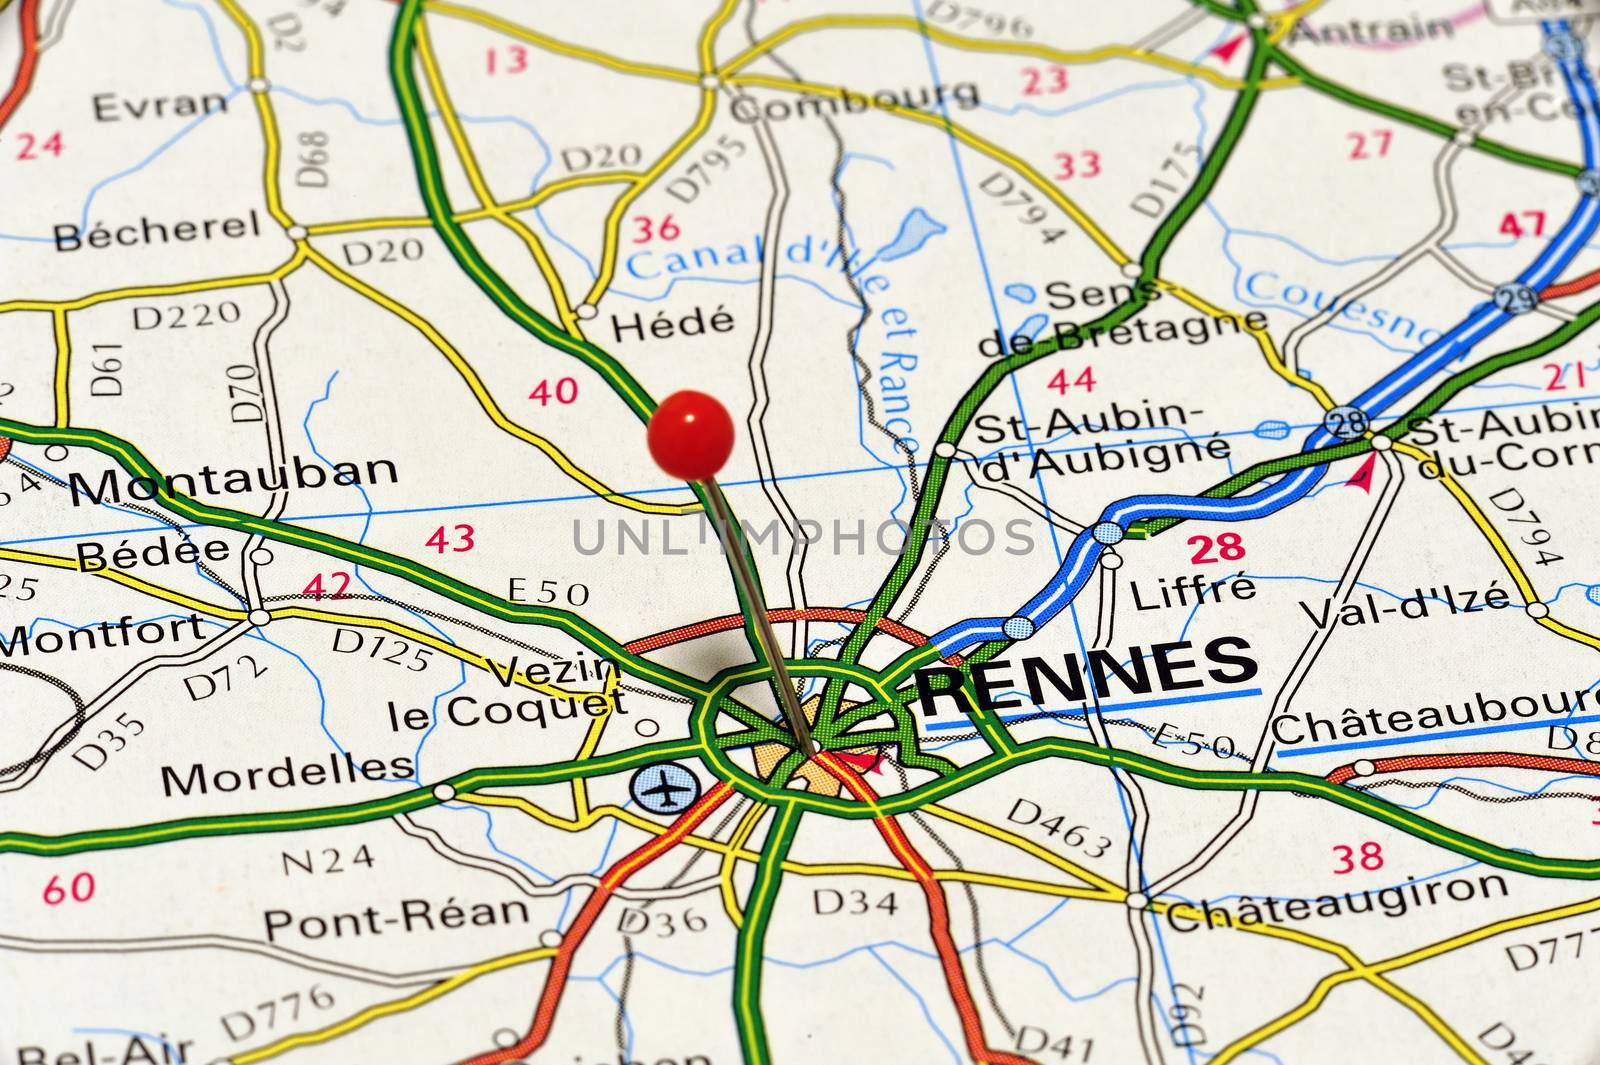 Close-up of the French town of Rennes in France on a road map photographed from above